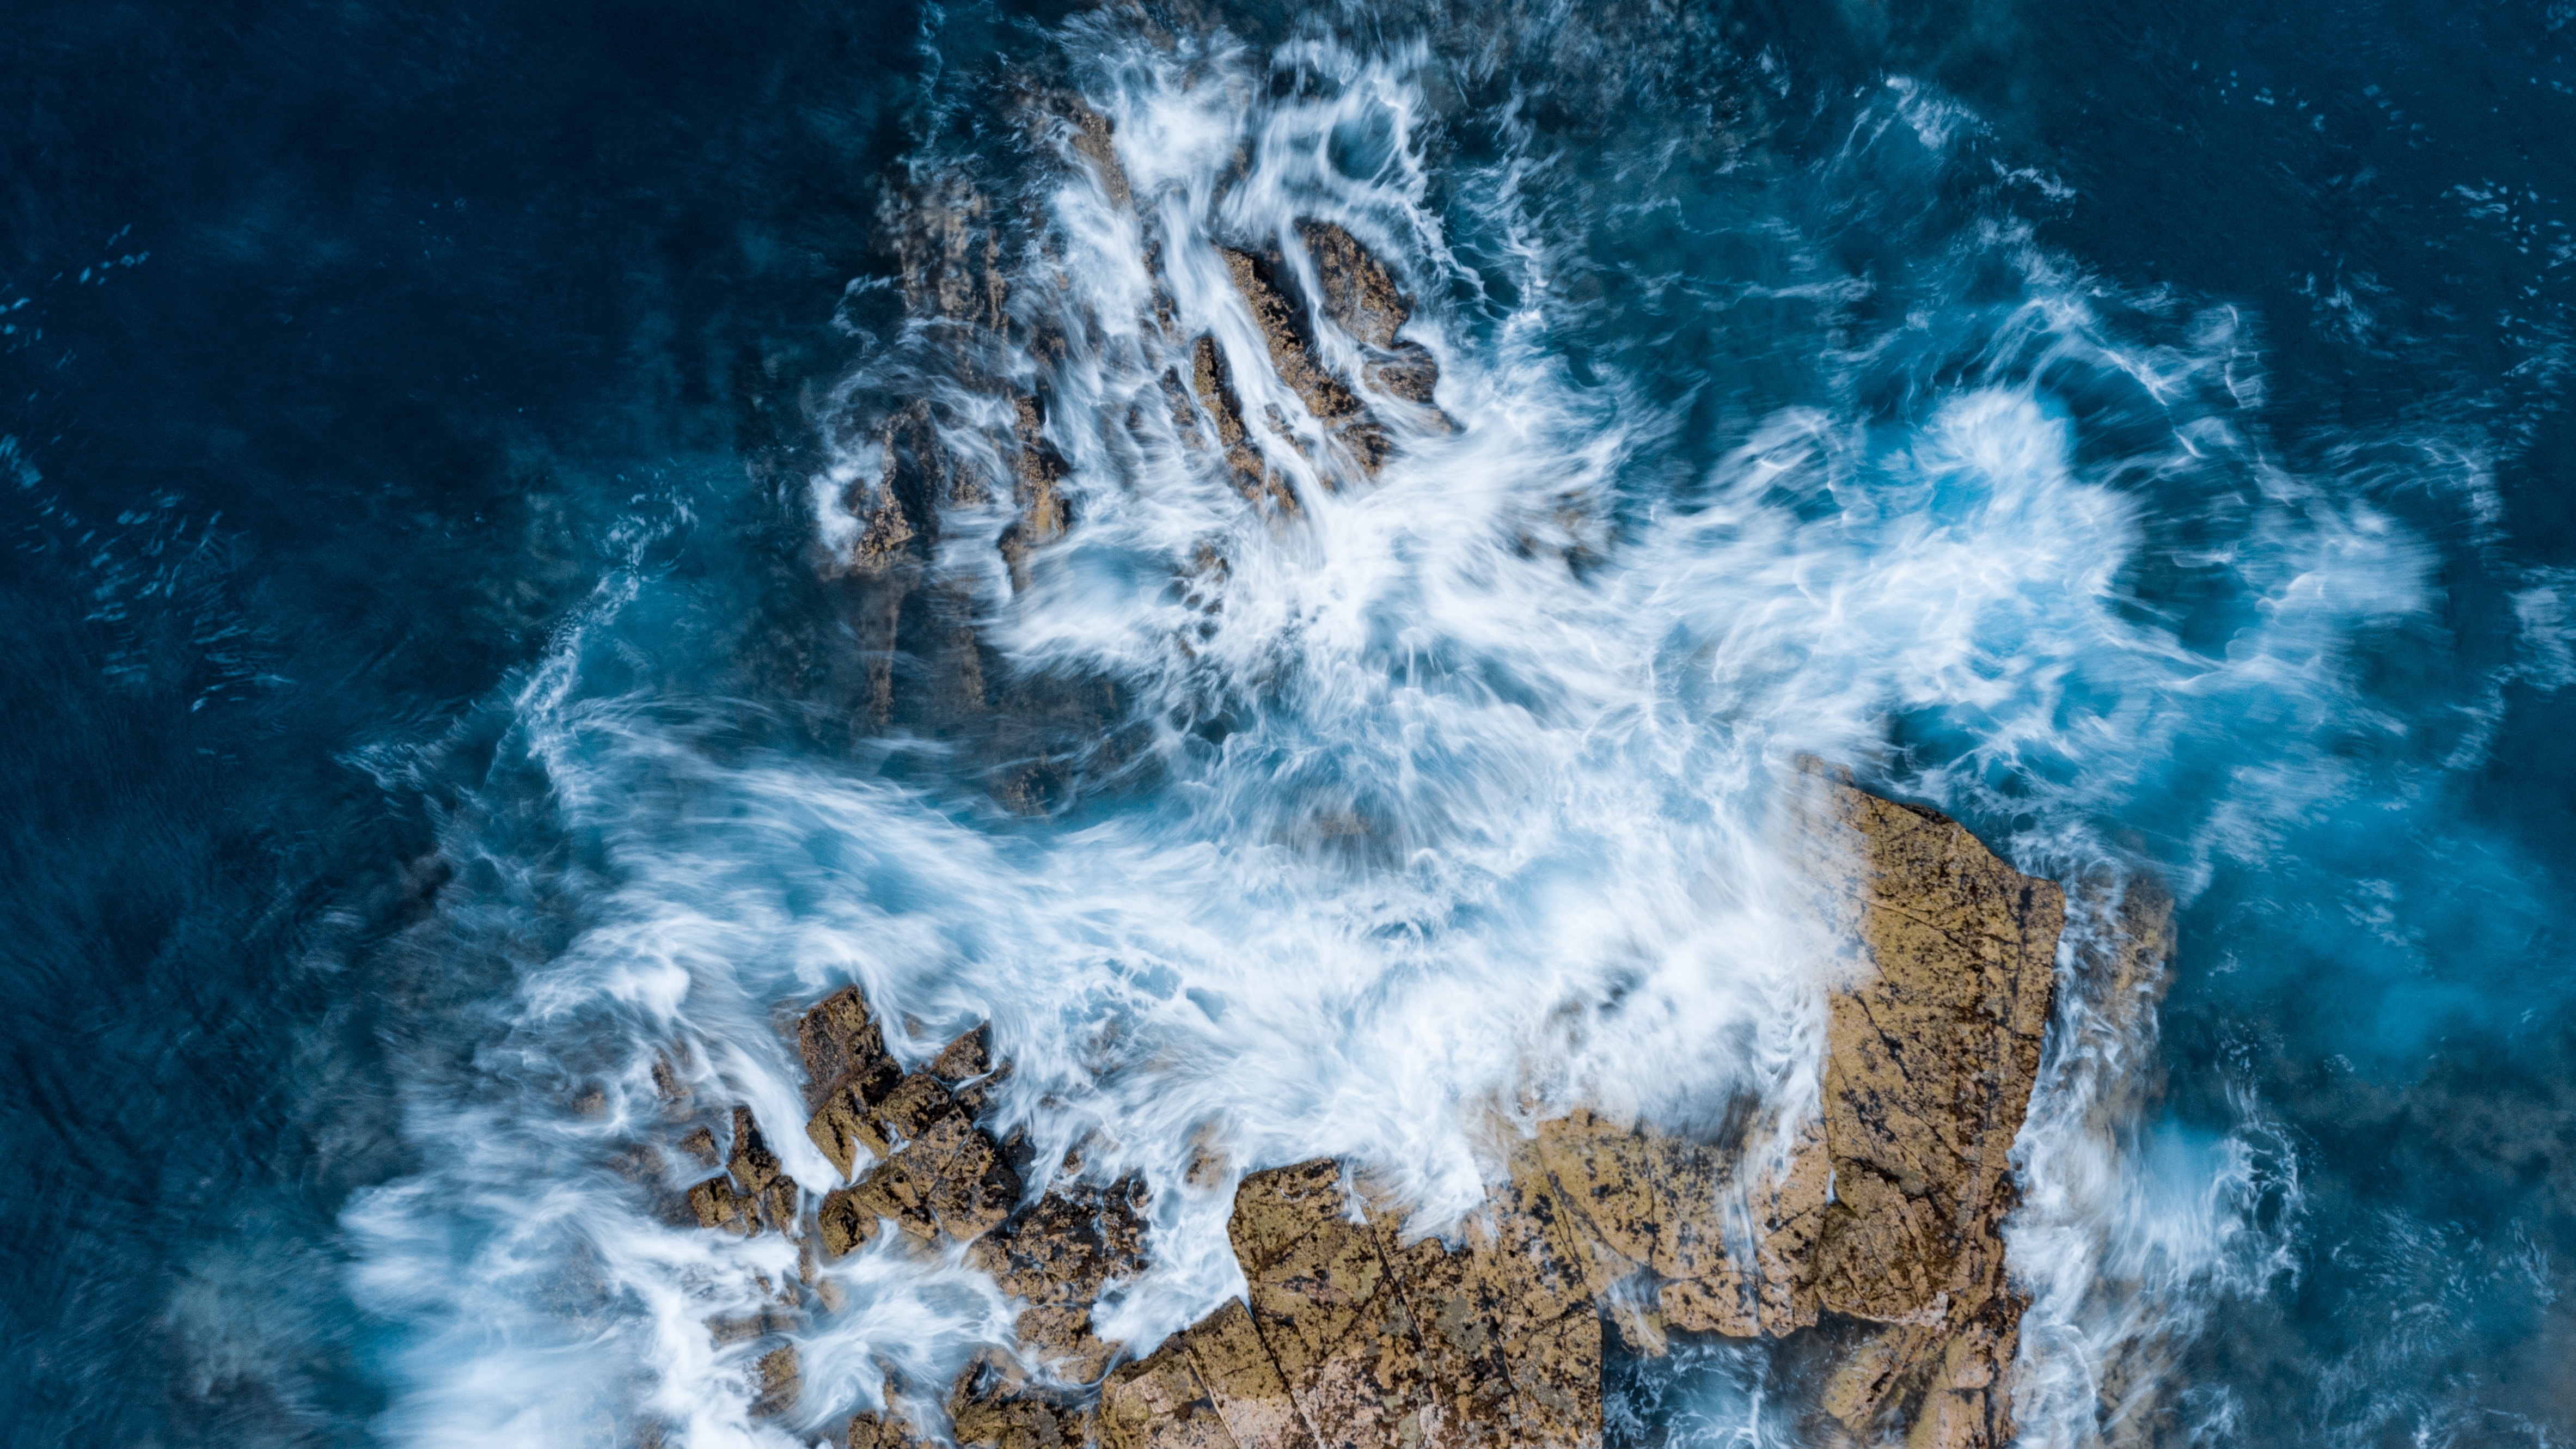 1920x1080 Background nature, water, waves, sea, rocks, view from above